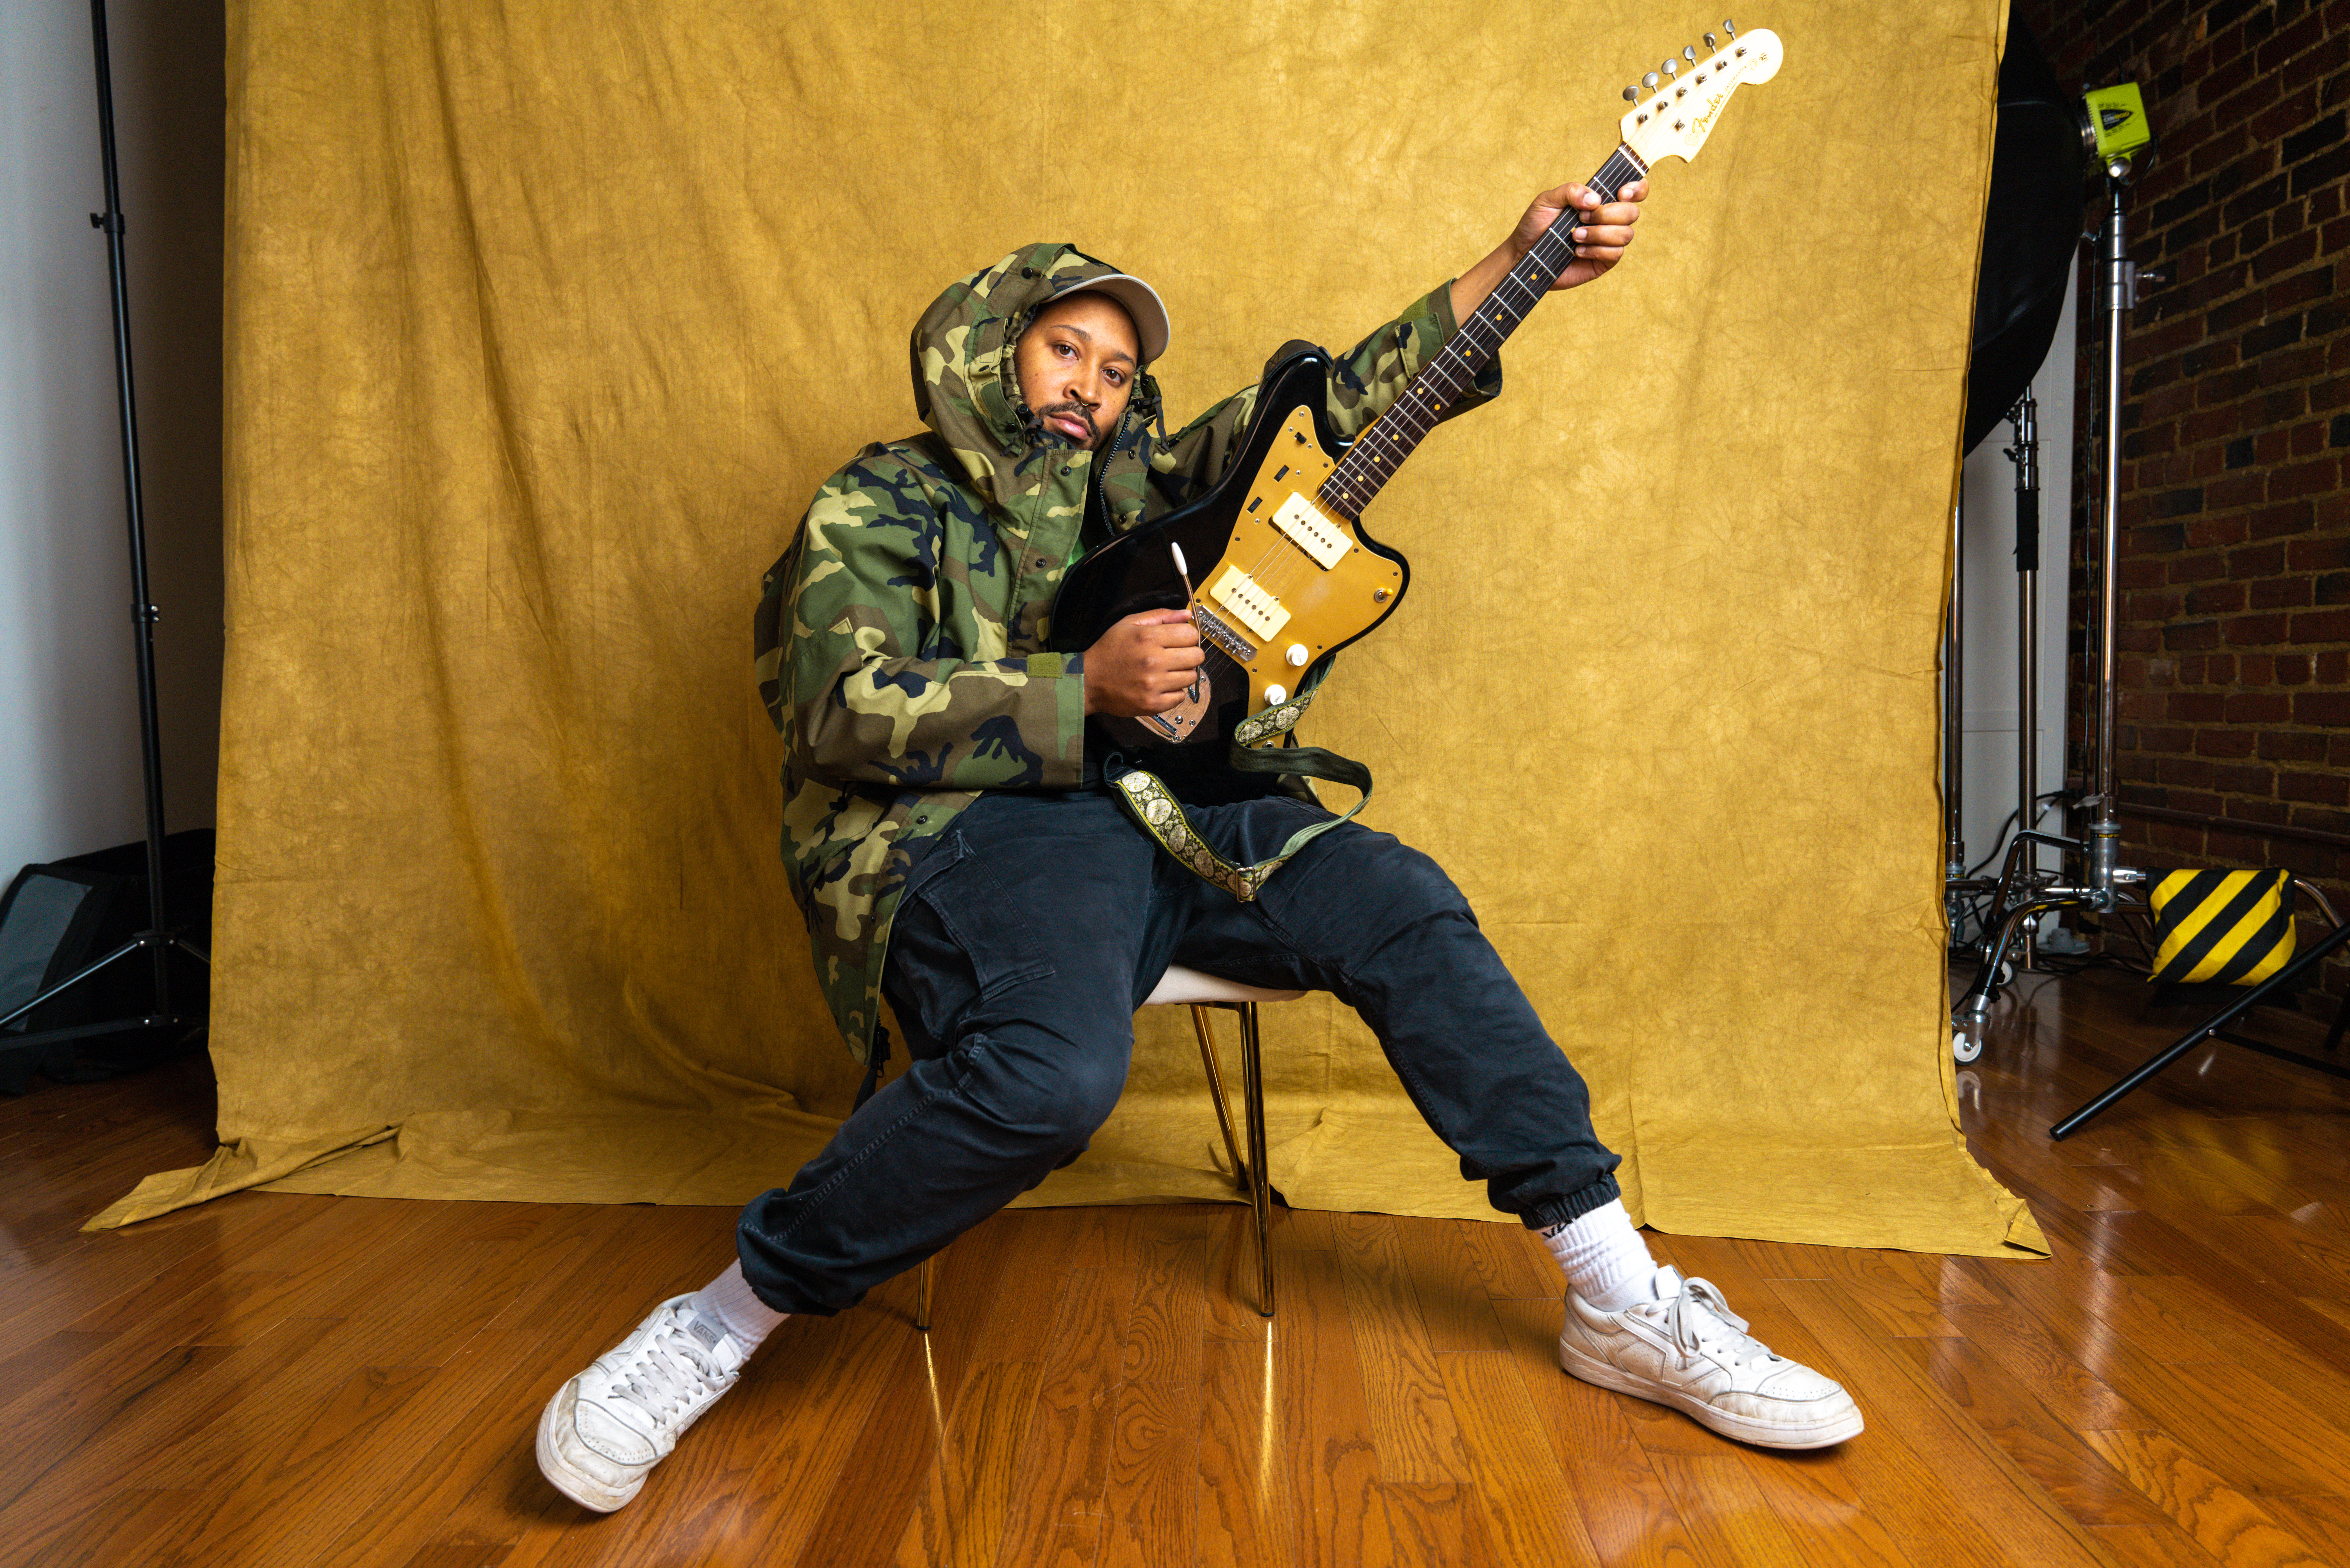 Sitting in front of a yellow backdrop, Bartees Strange holds an electric guitar